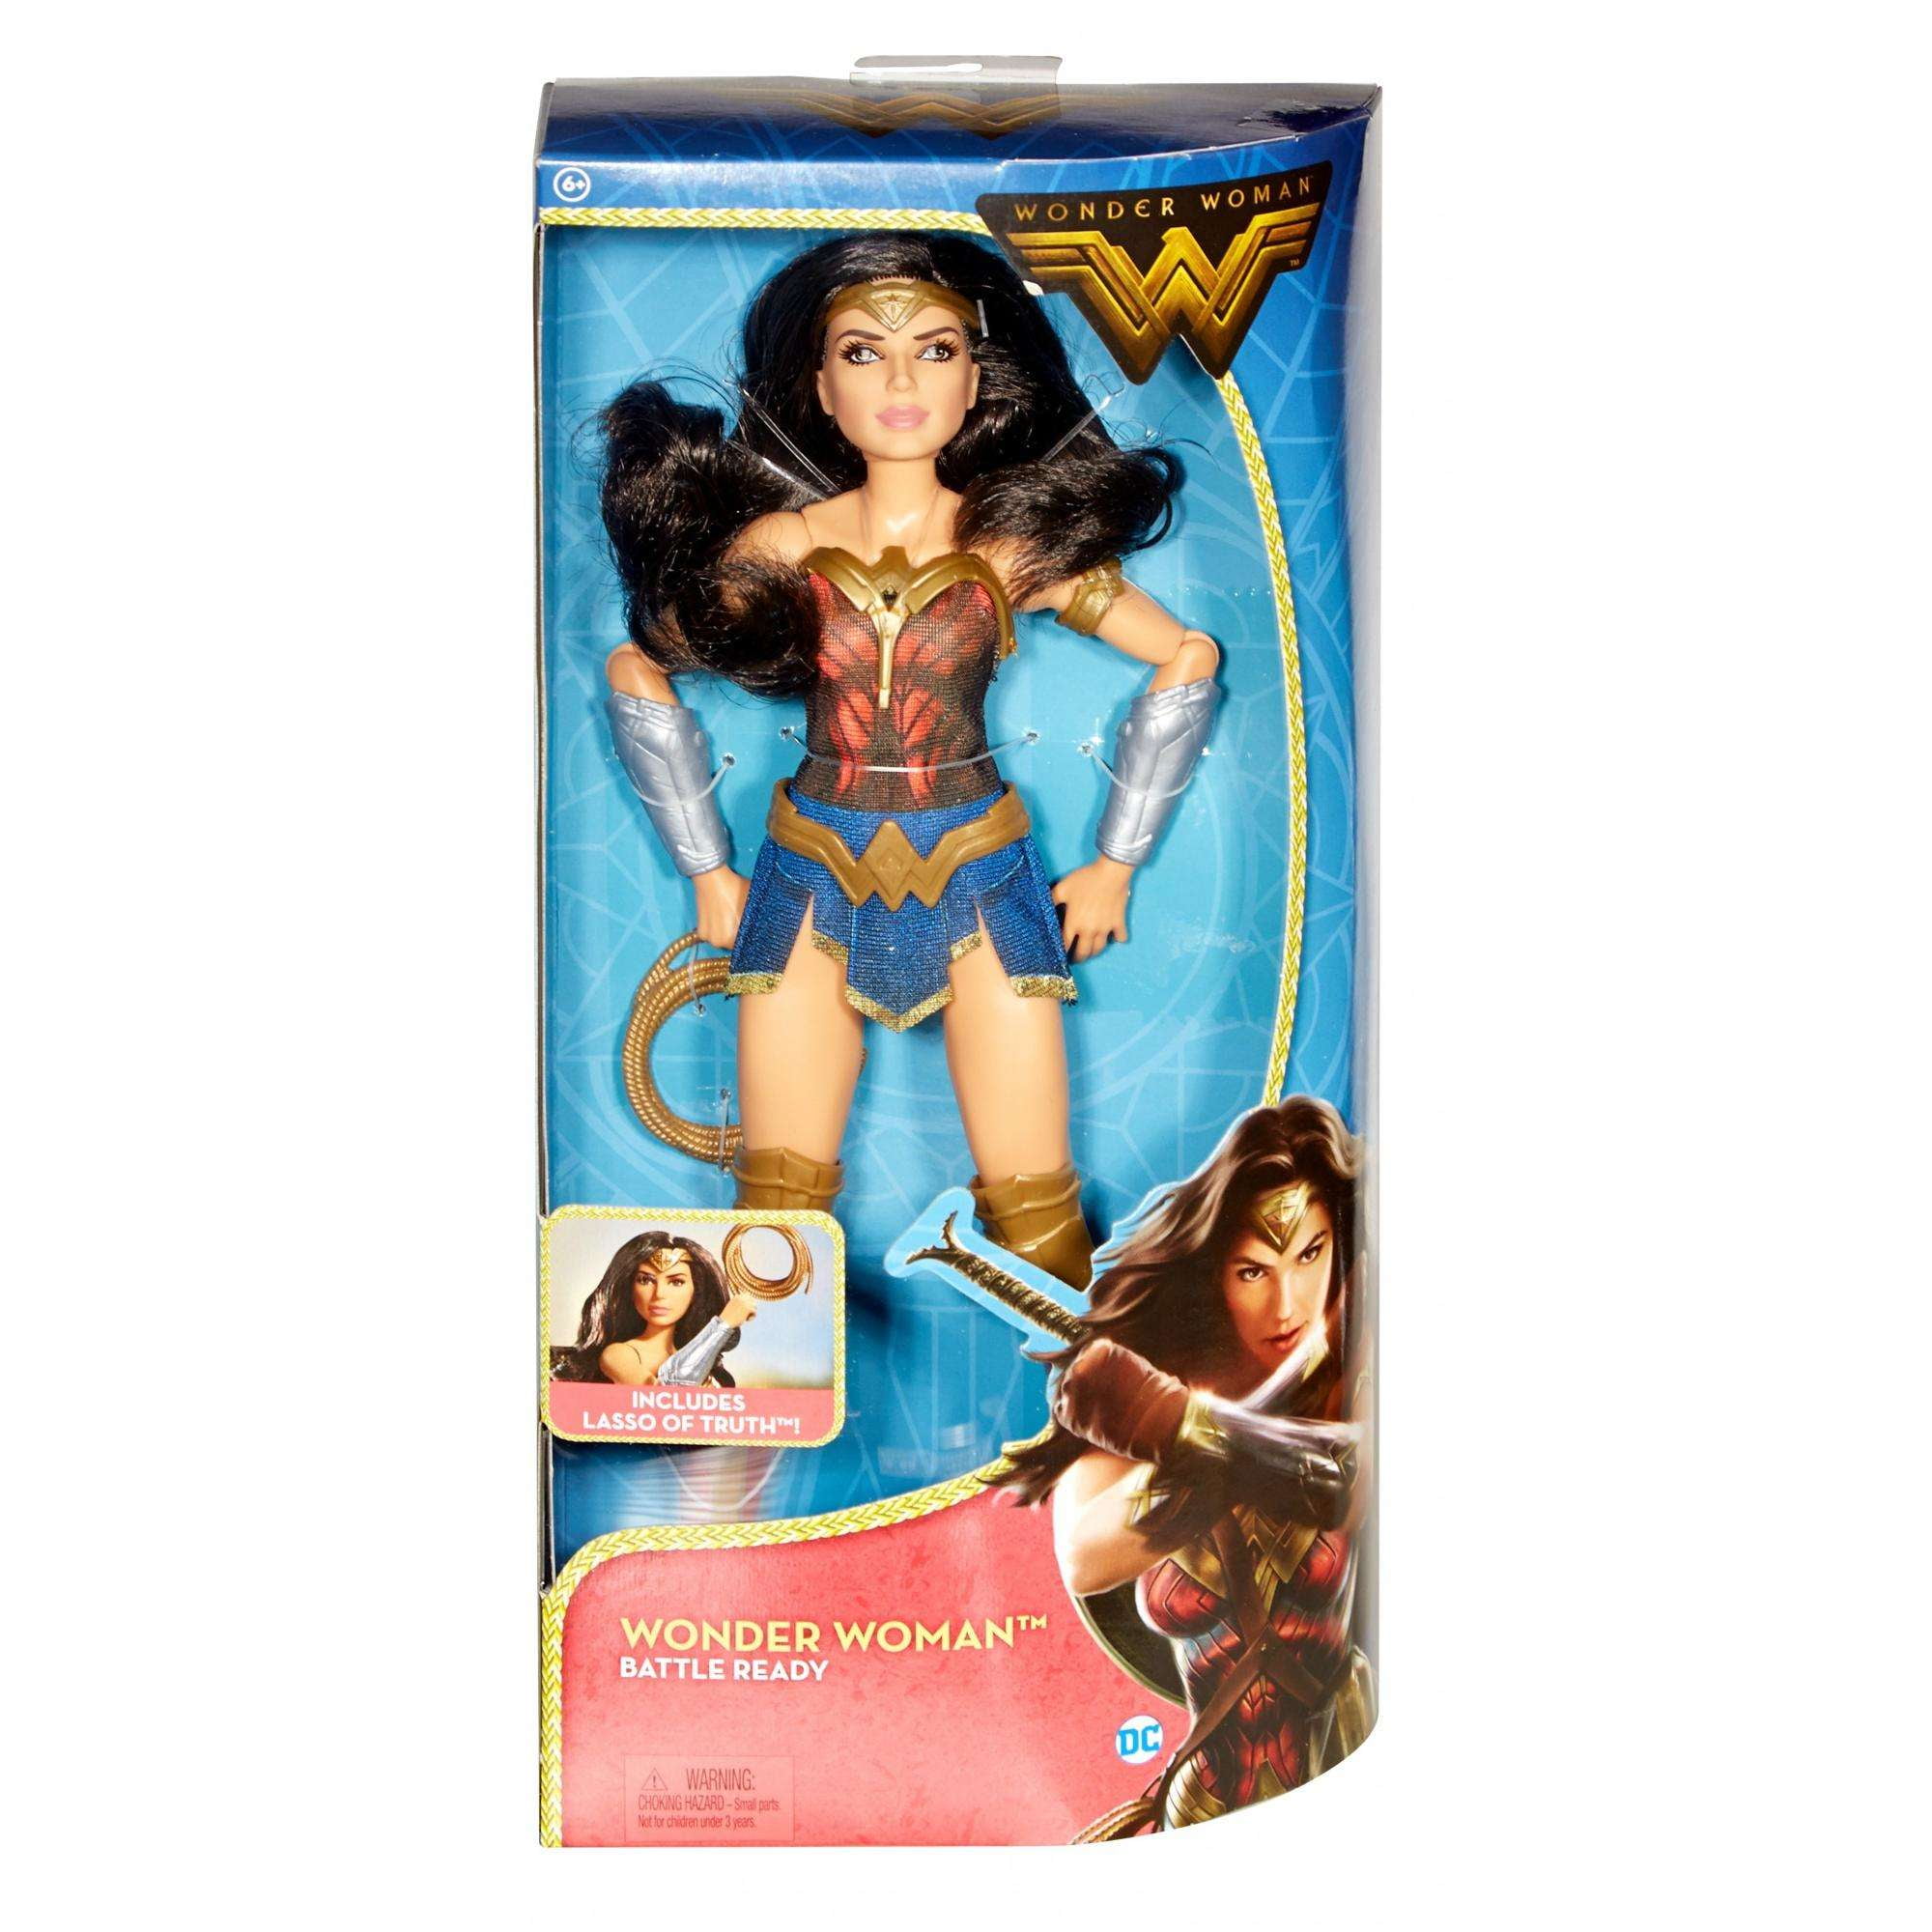 Wonder Woman Battle Ready Doll Top Sellers, 52% OFF | lagence.tv